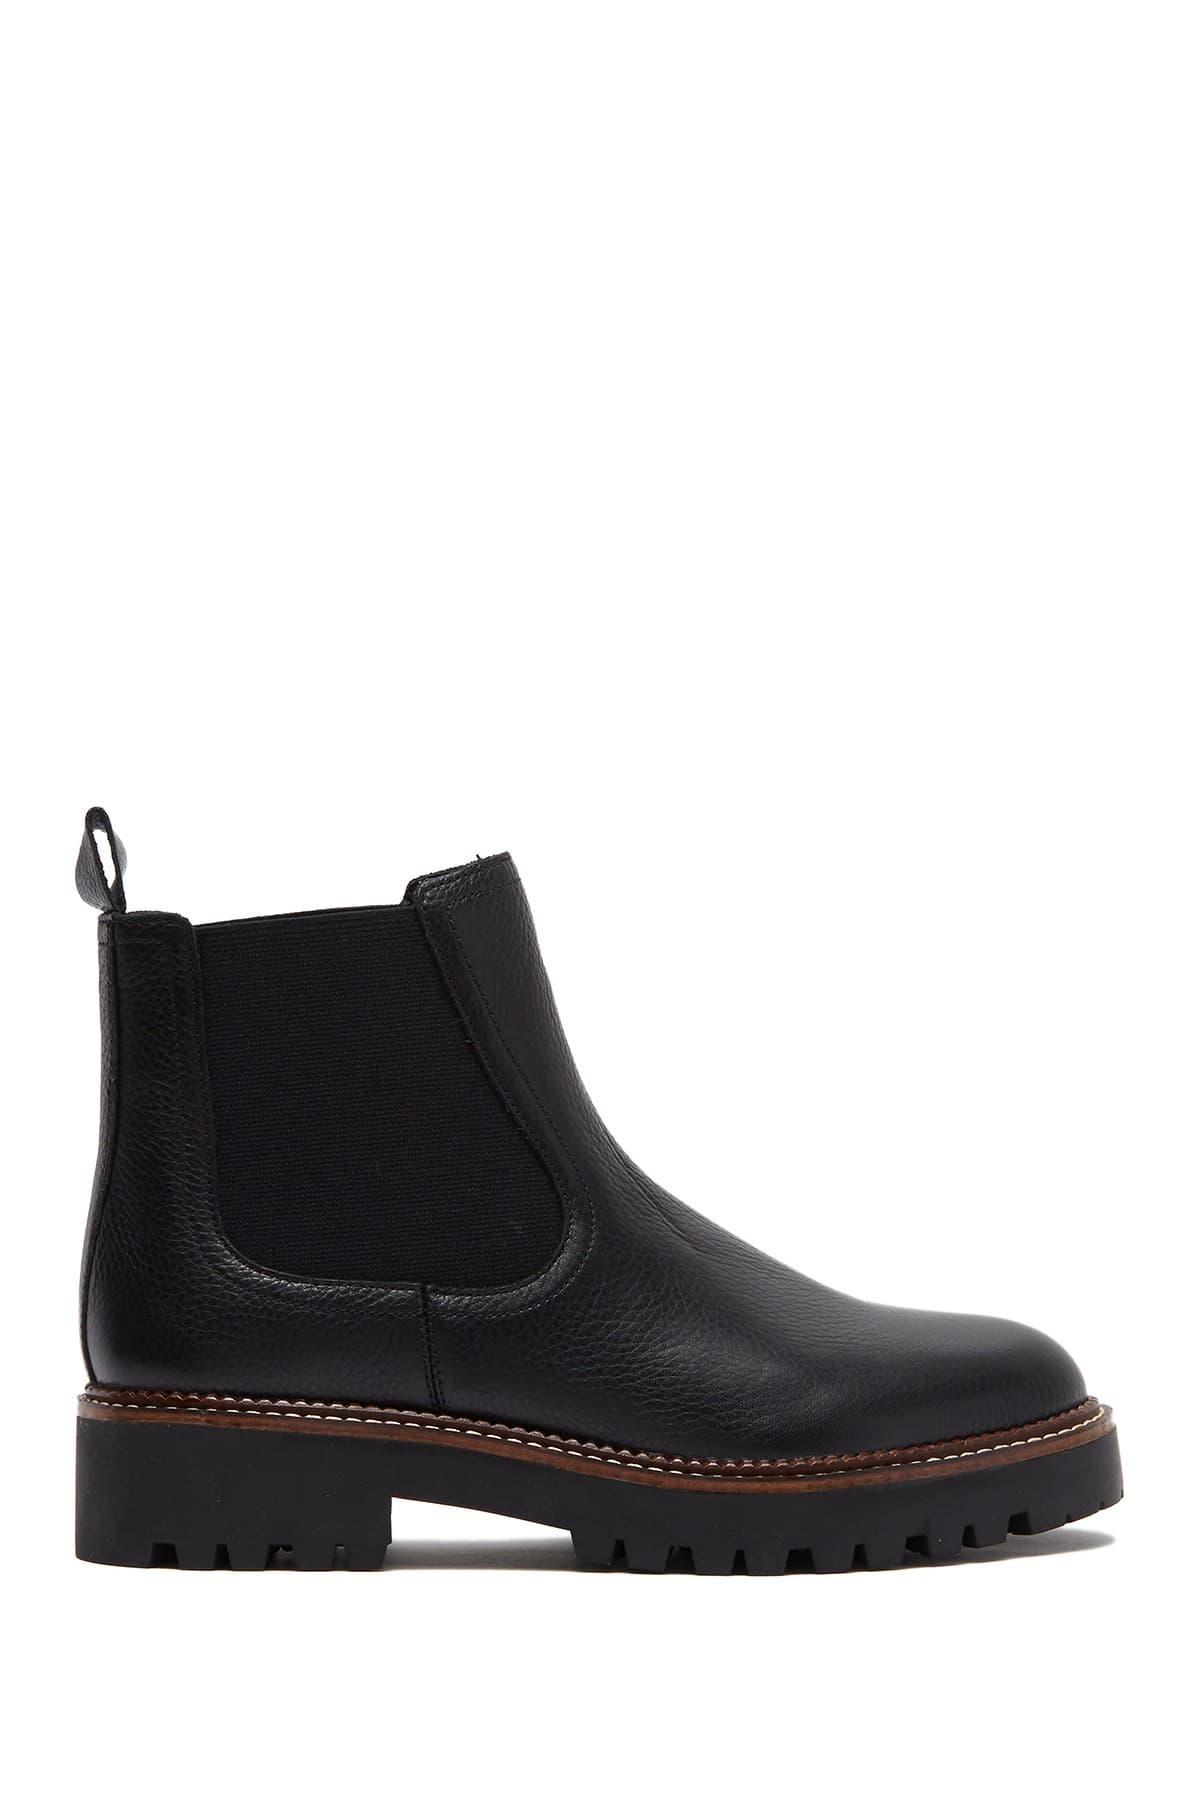 Caslon Miller Water Resistant Leather Chelsea Boot in Black | Lyst